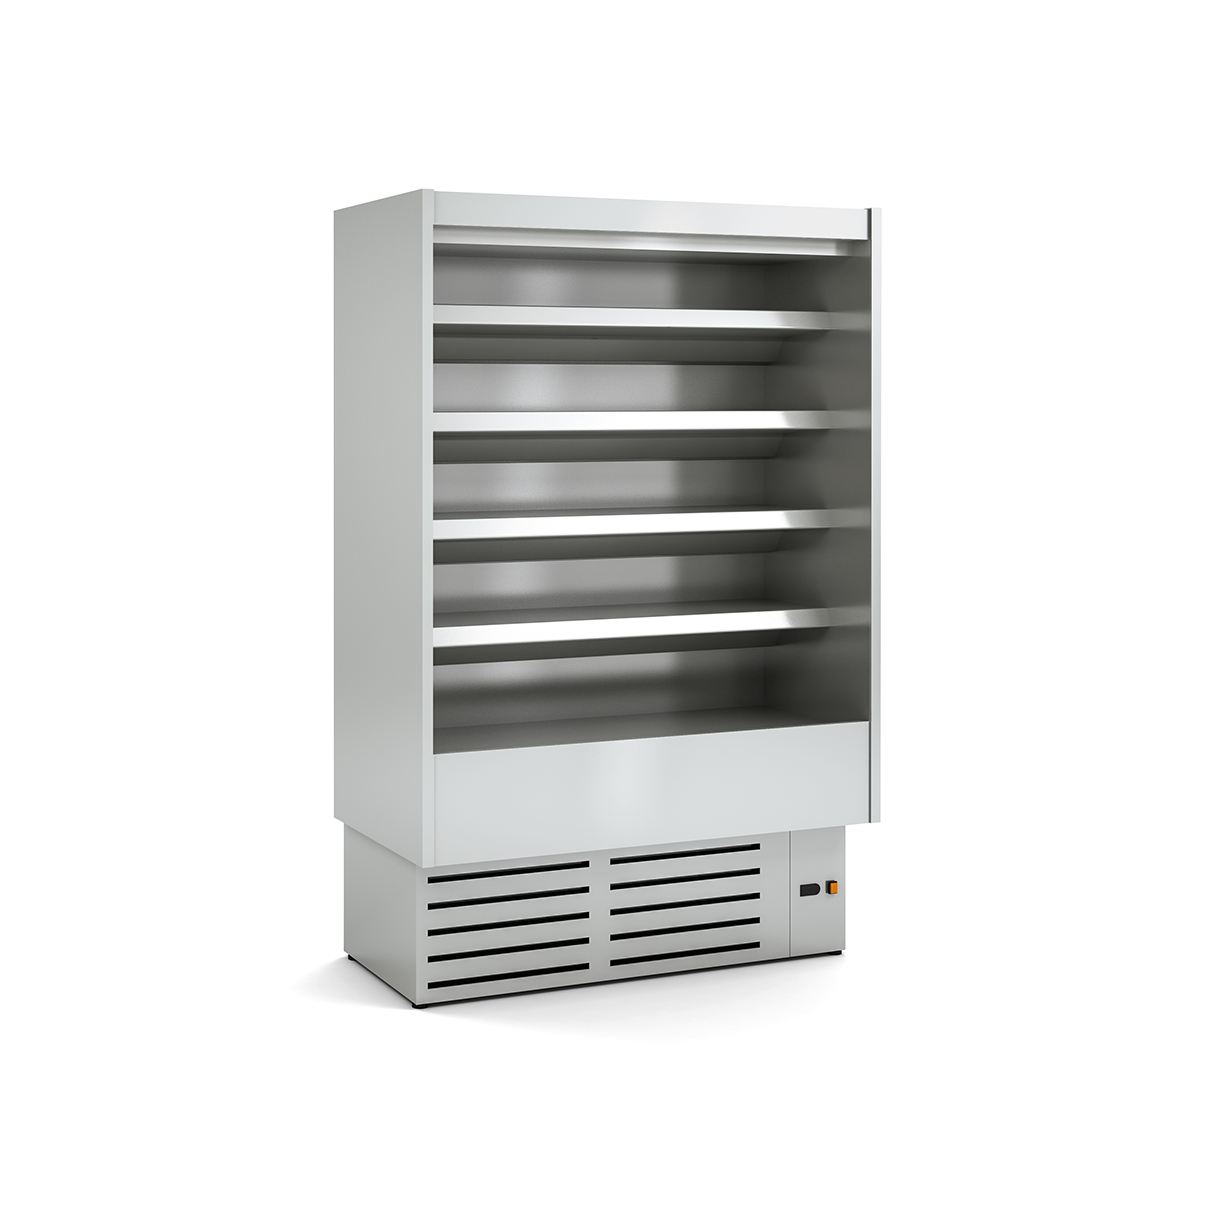 REFRIGERATED WALL CABINET DS1 I M1-M2